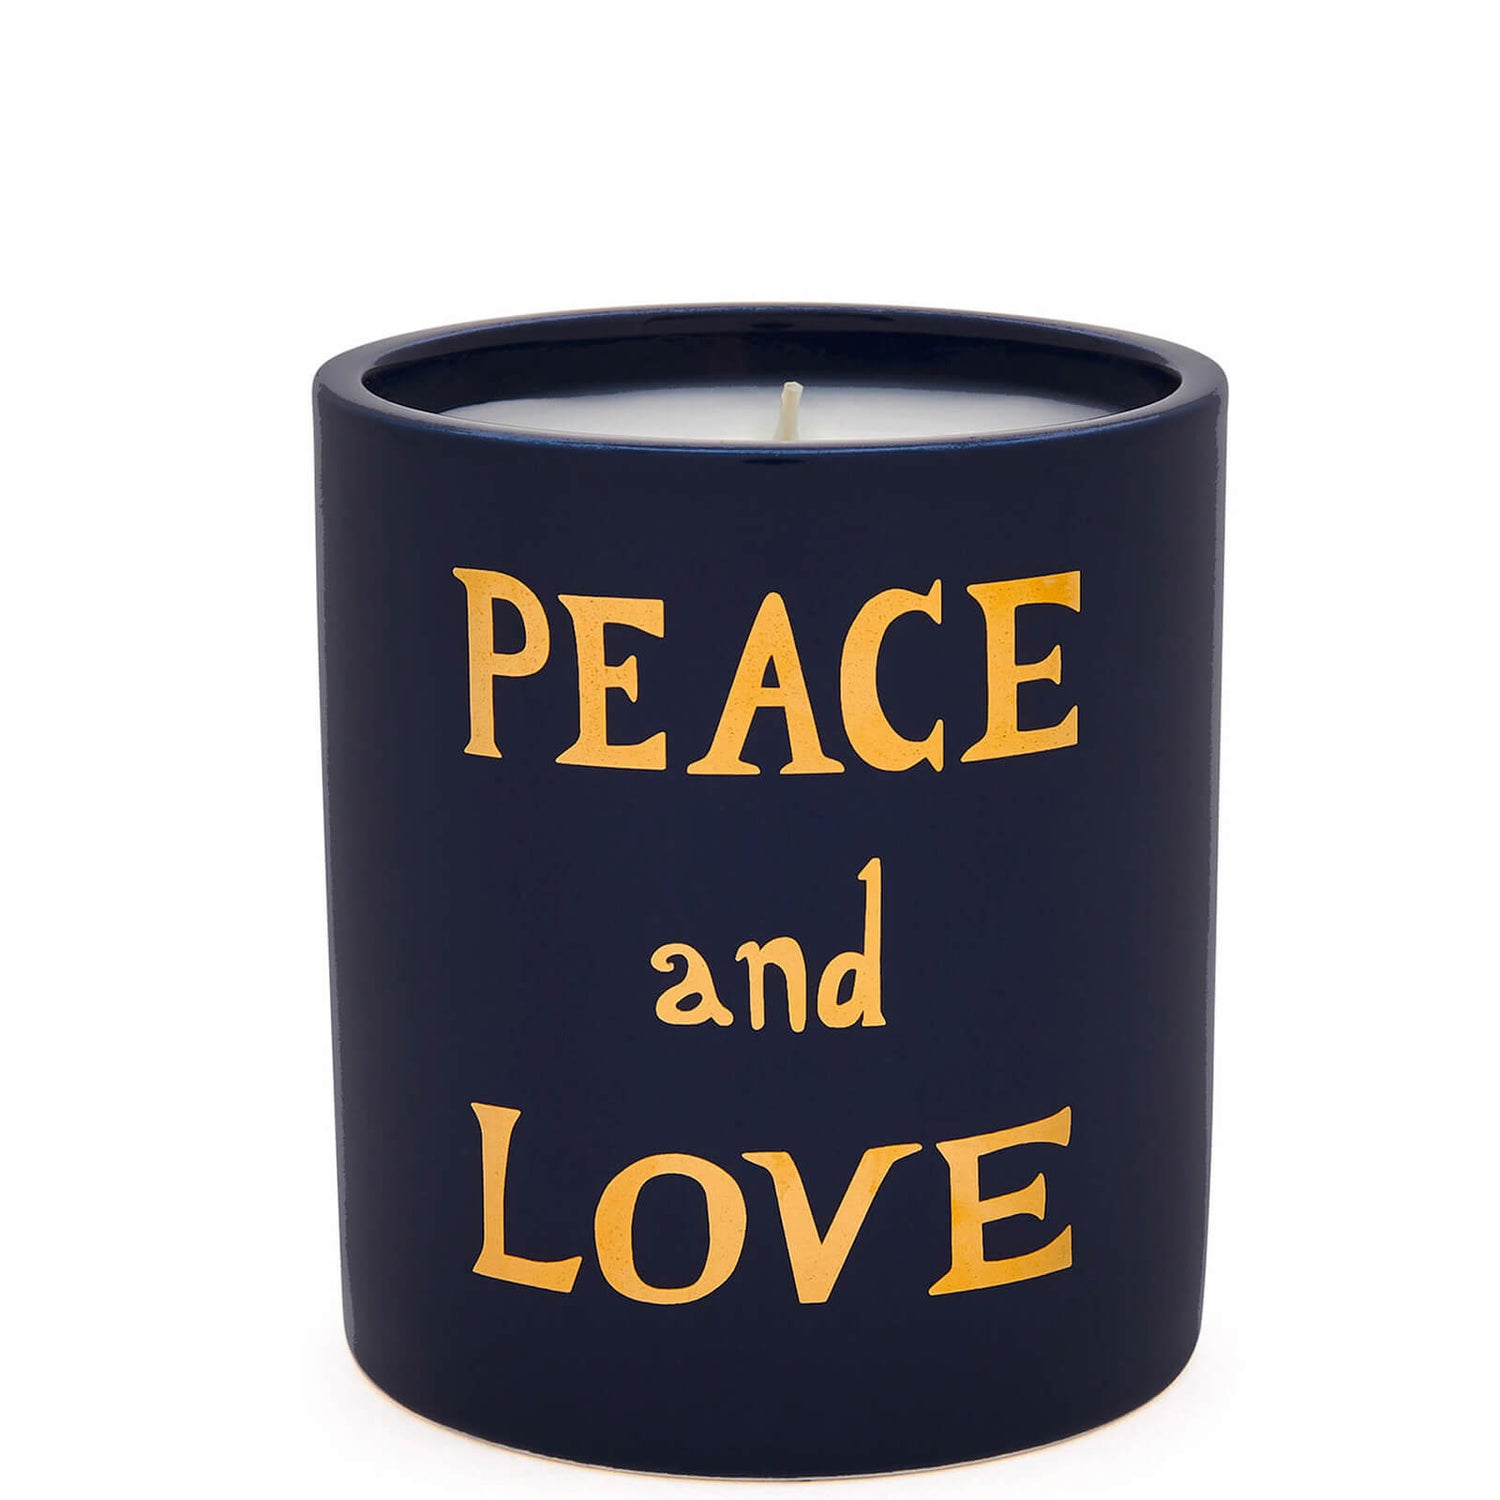 Bella Freud Peace and Love Candle